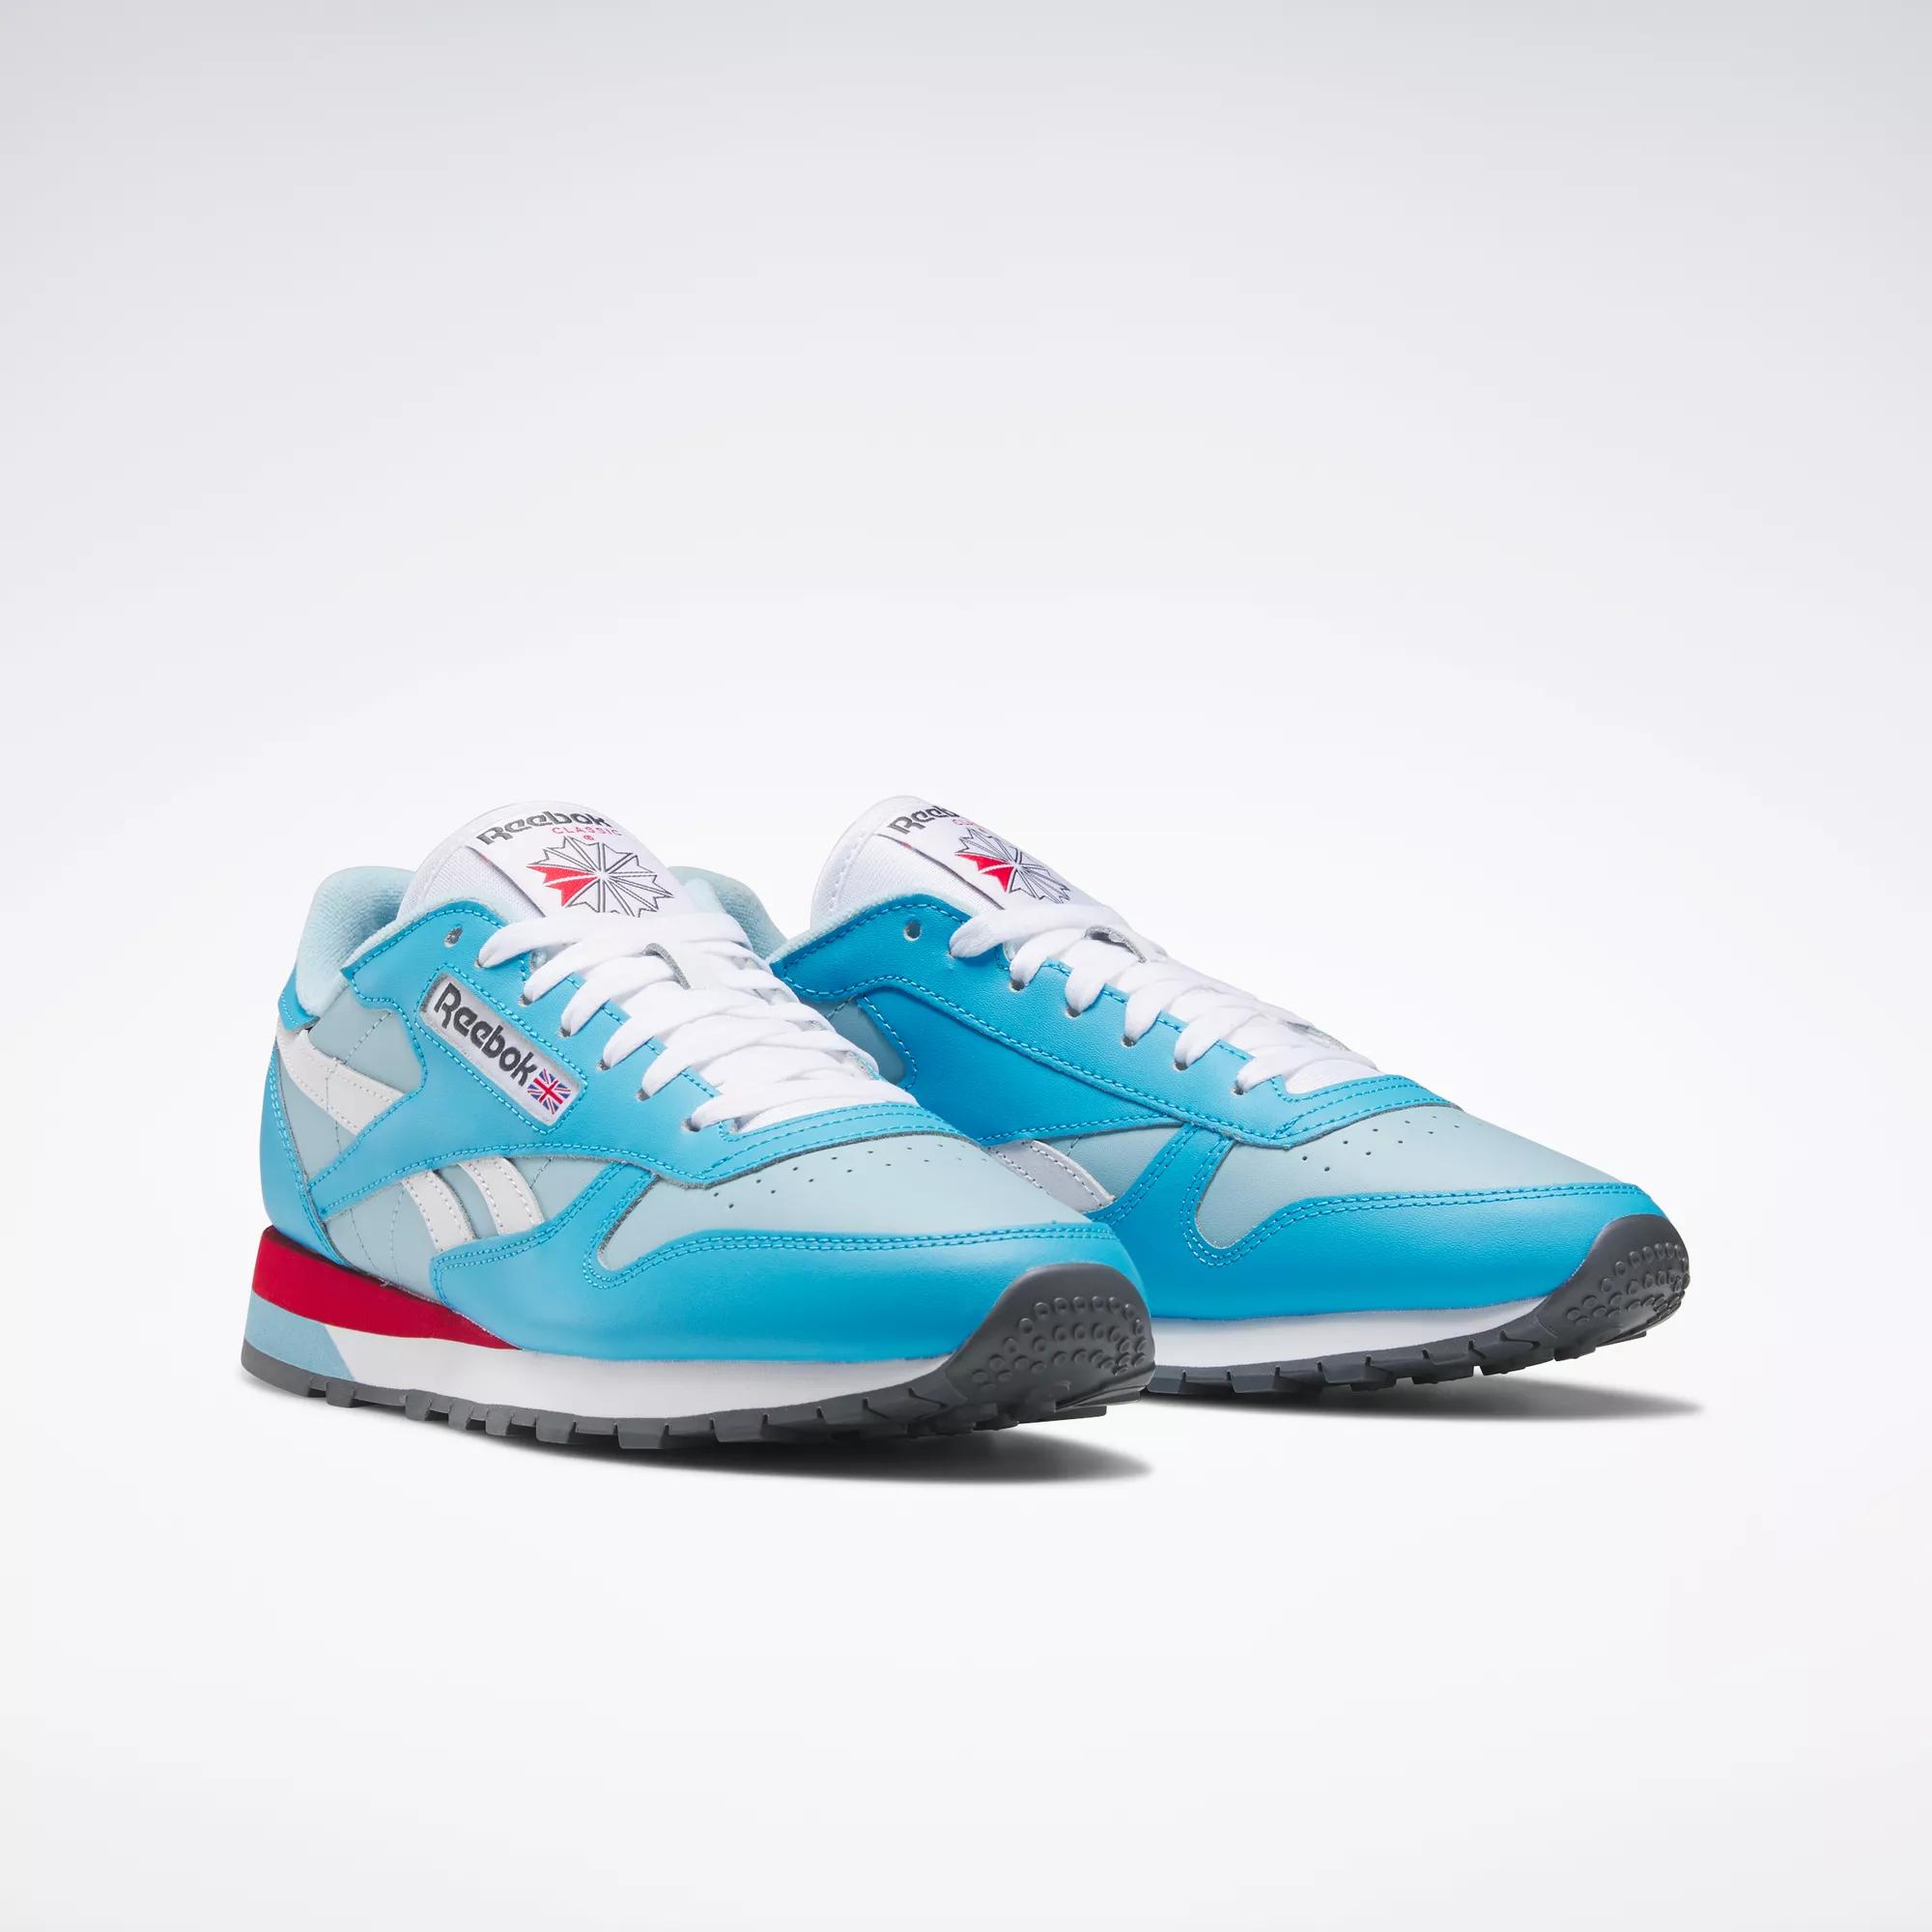 Tradition blødende Compulsion Classic Leather Shoes - Radiant Aqua / Blue Pearl / Ftwr White | Reebok